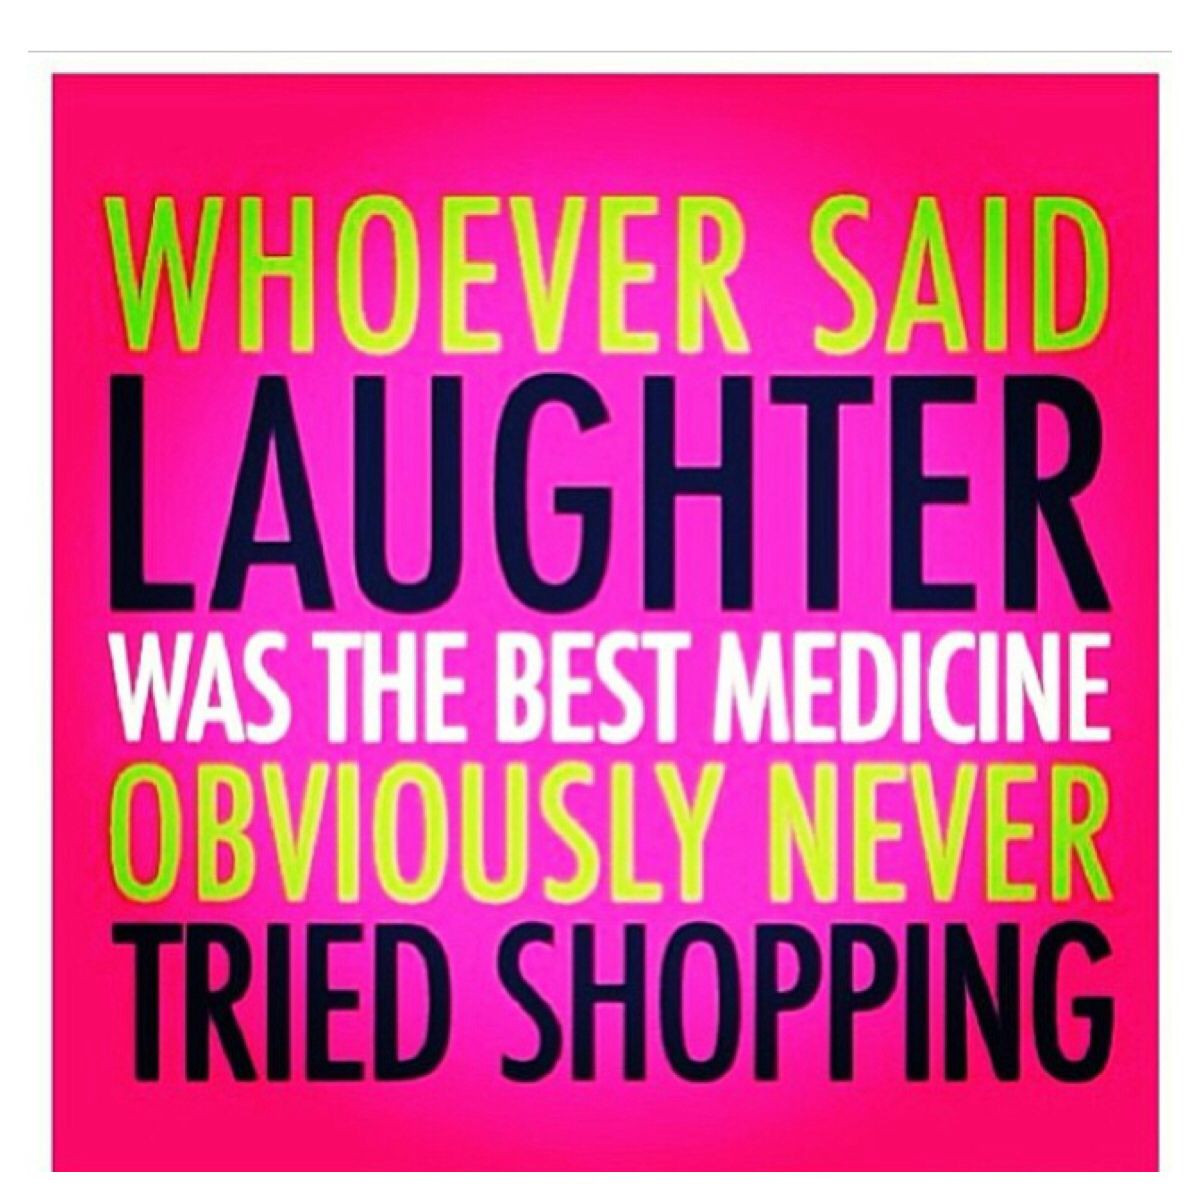 Funny Retail Quotes
 Retail therapy is good for the soul